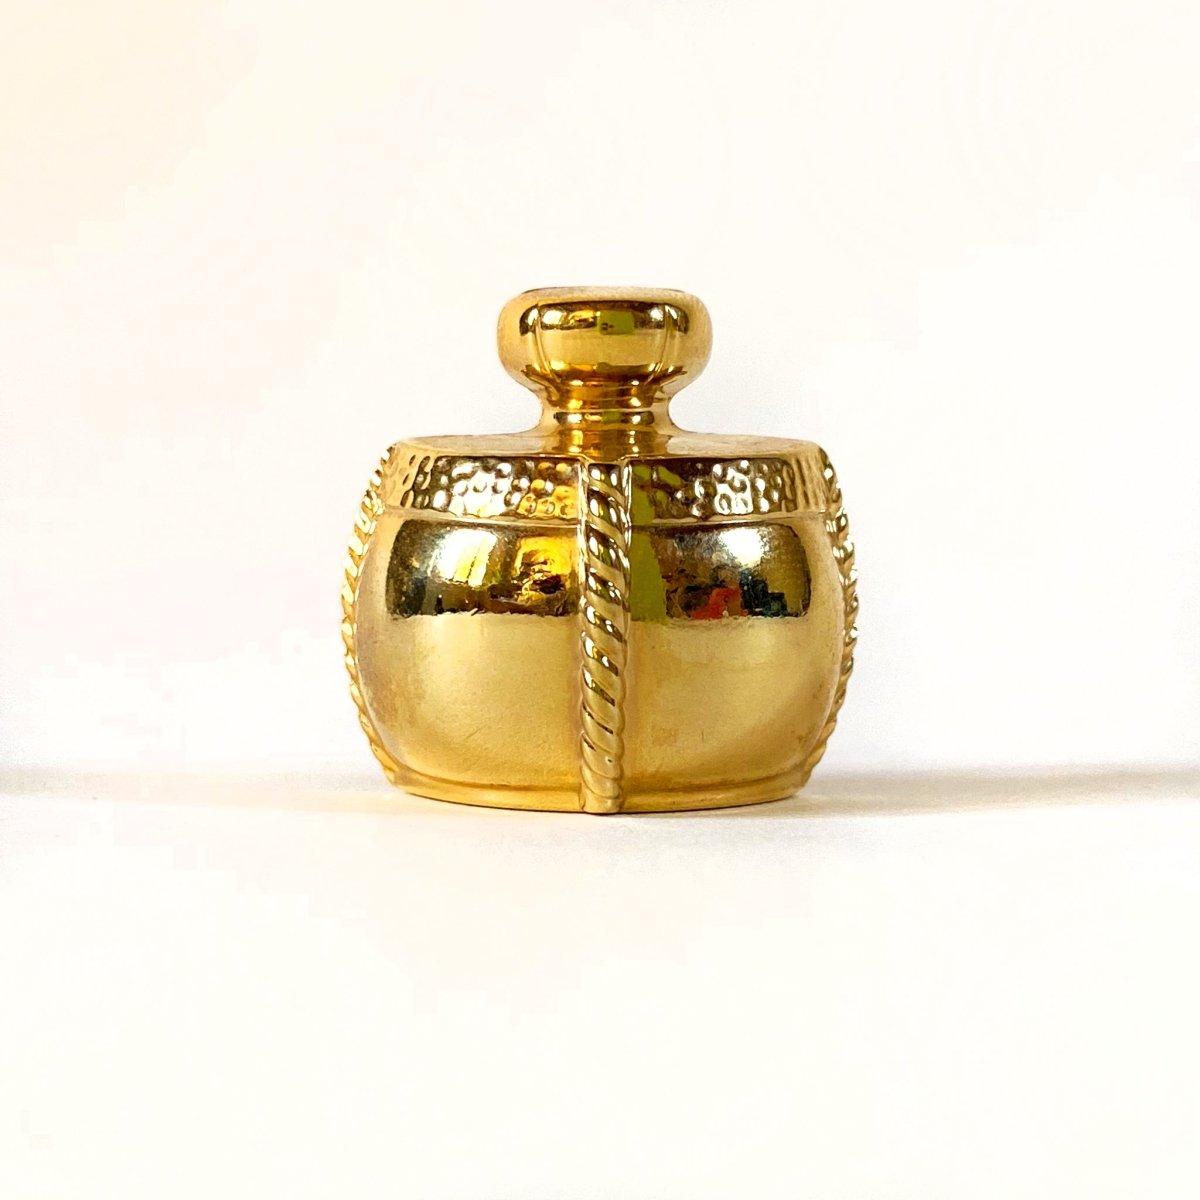 Yves Saint Laurent Gold Plated Bottle Brooch - Nataly Aponte